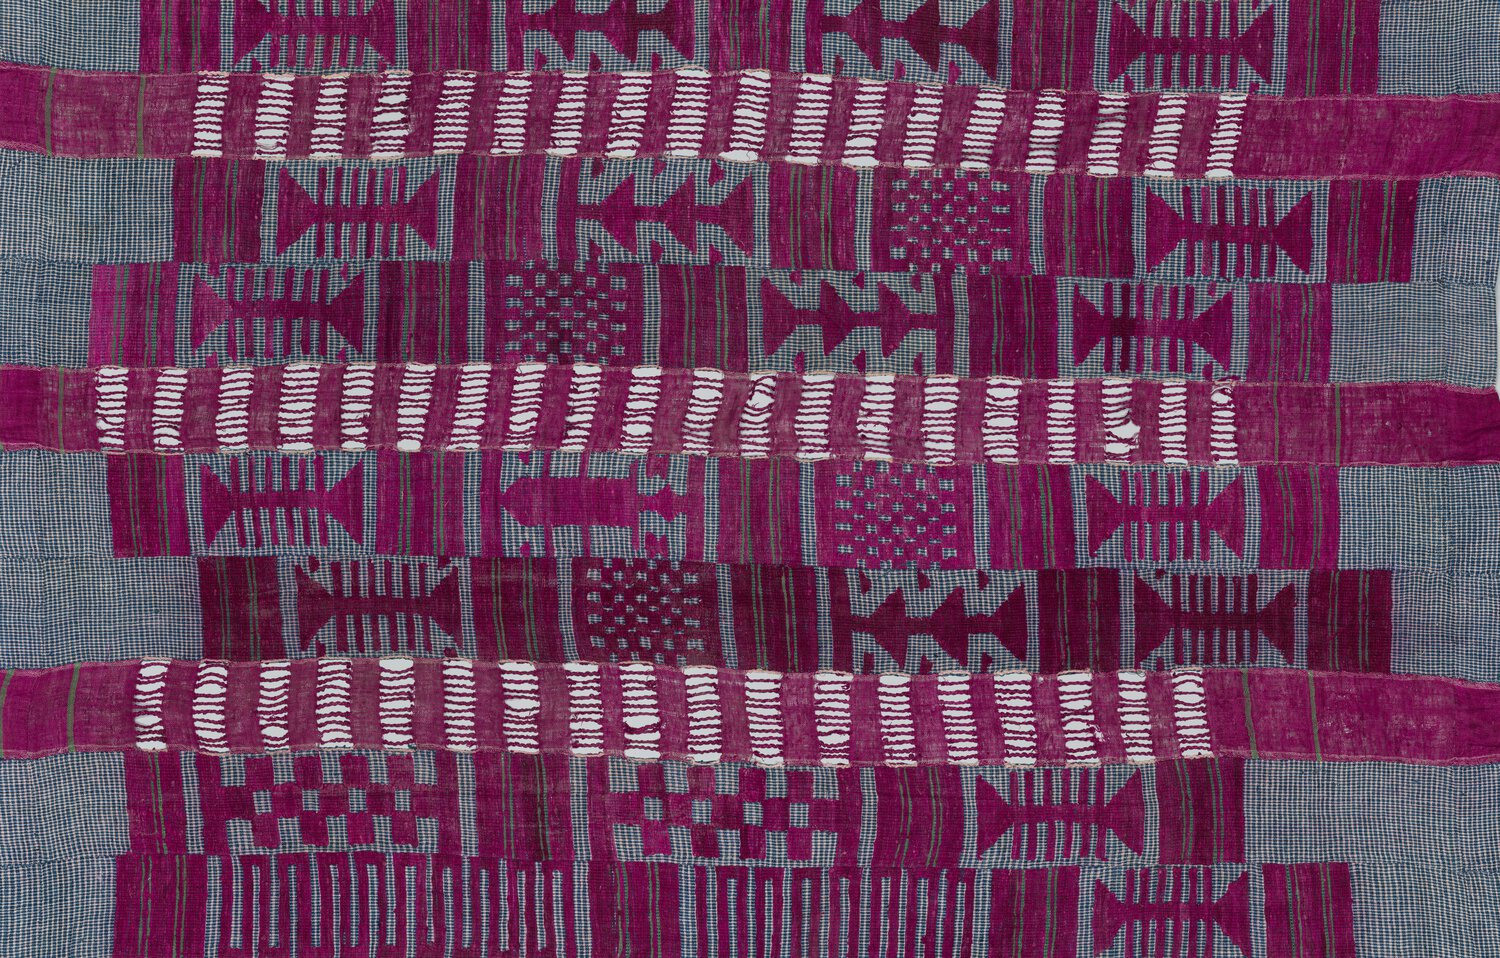 Work of cotton and silk: purple, white, and black in repeating linear patterns.